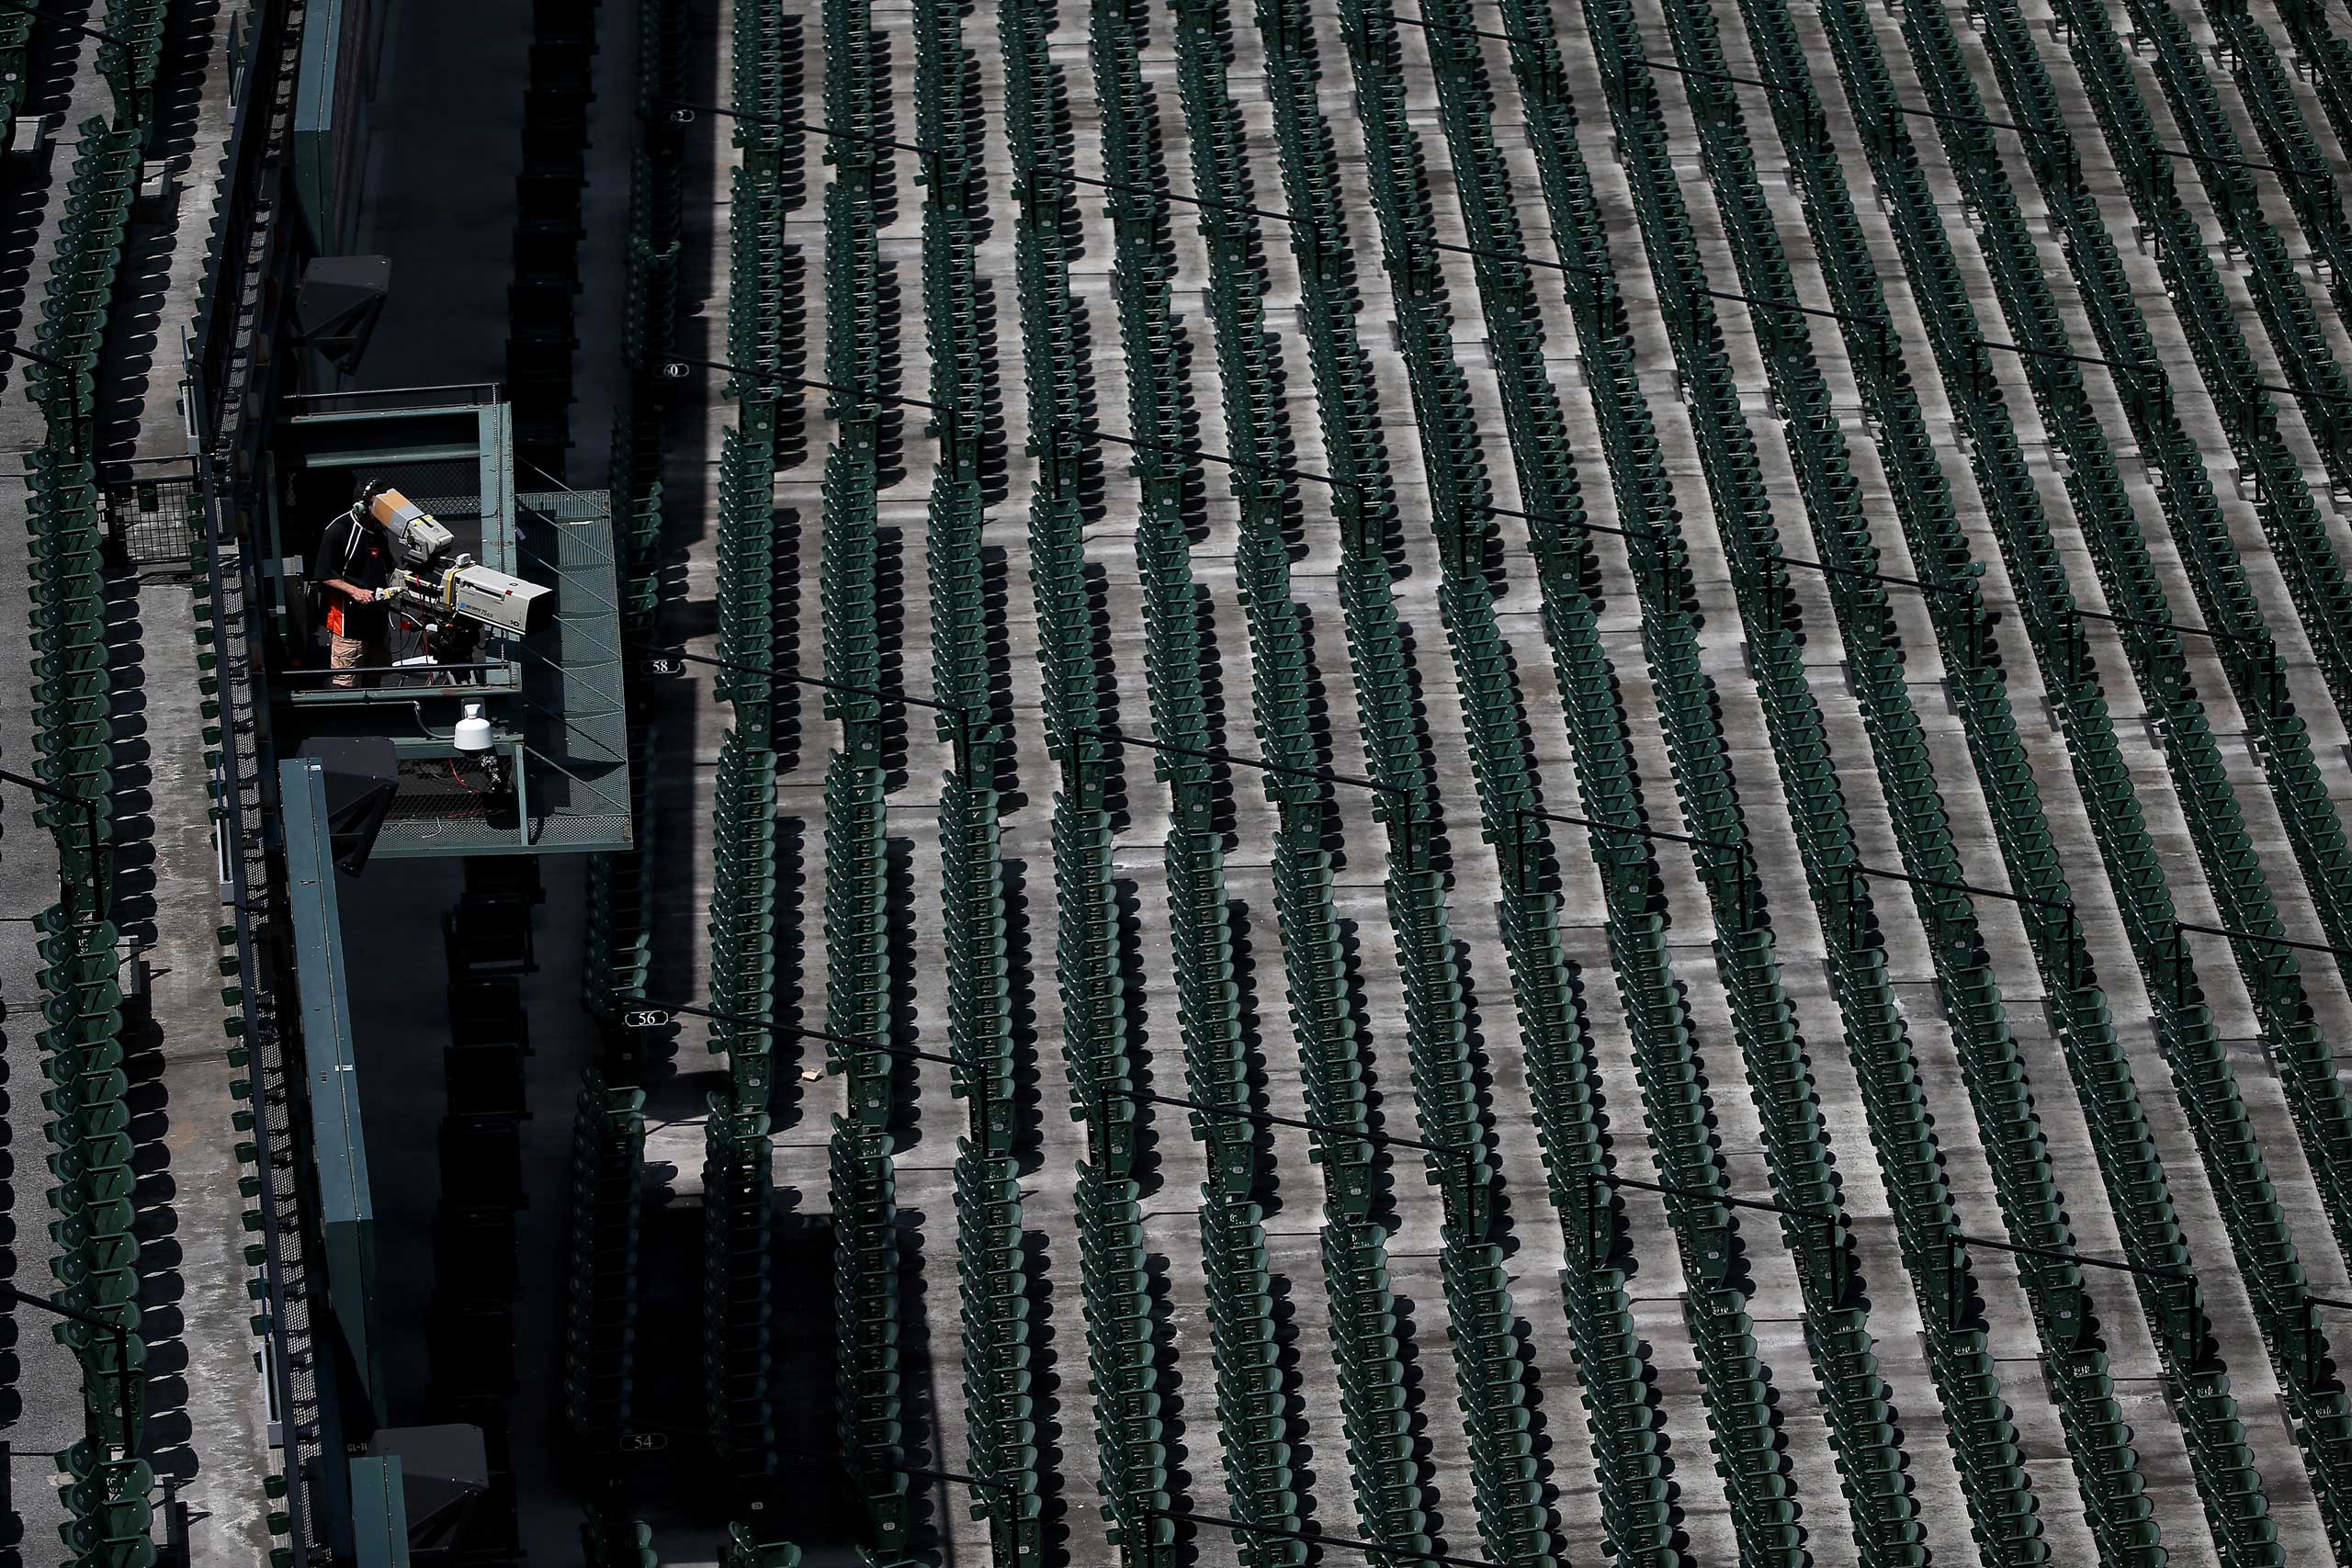 Empty seats are shown before the Baltimore Orioles play the Chicago White Sox at an empty Oriole Park at Camden Yards in Baltimore on April 29, 2015.